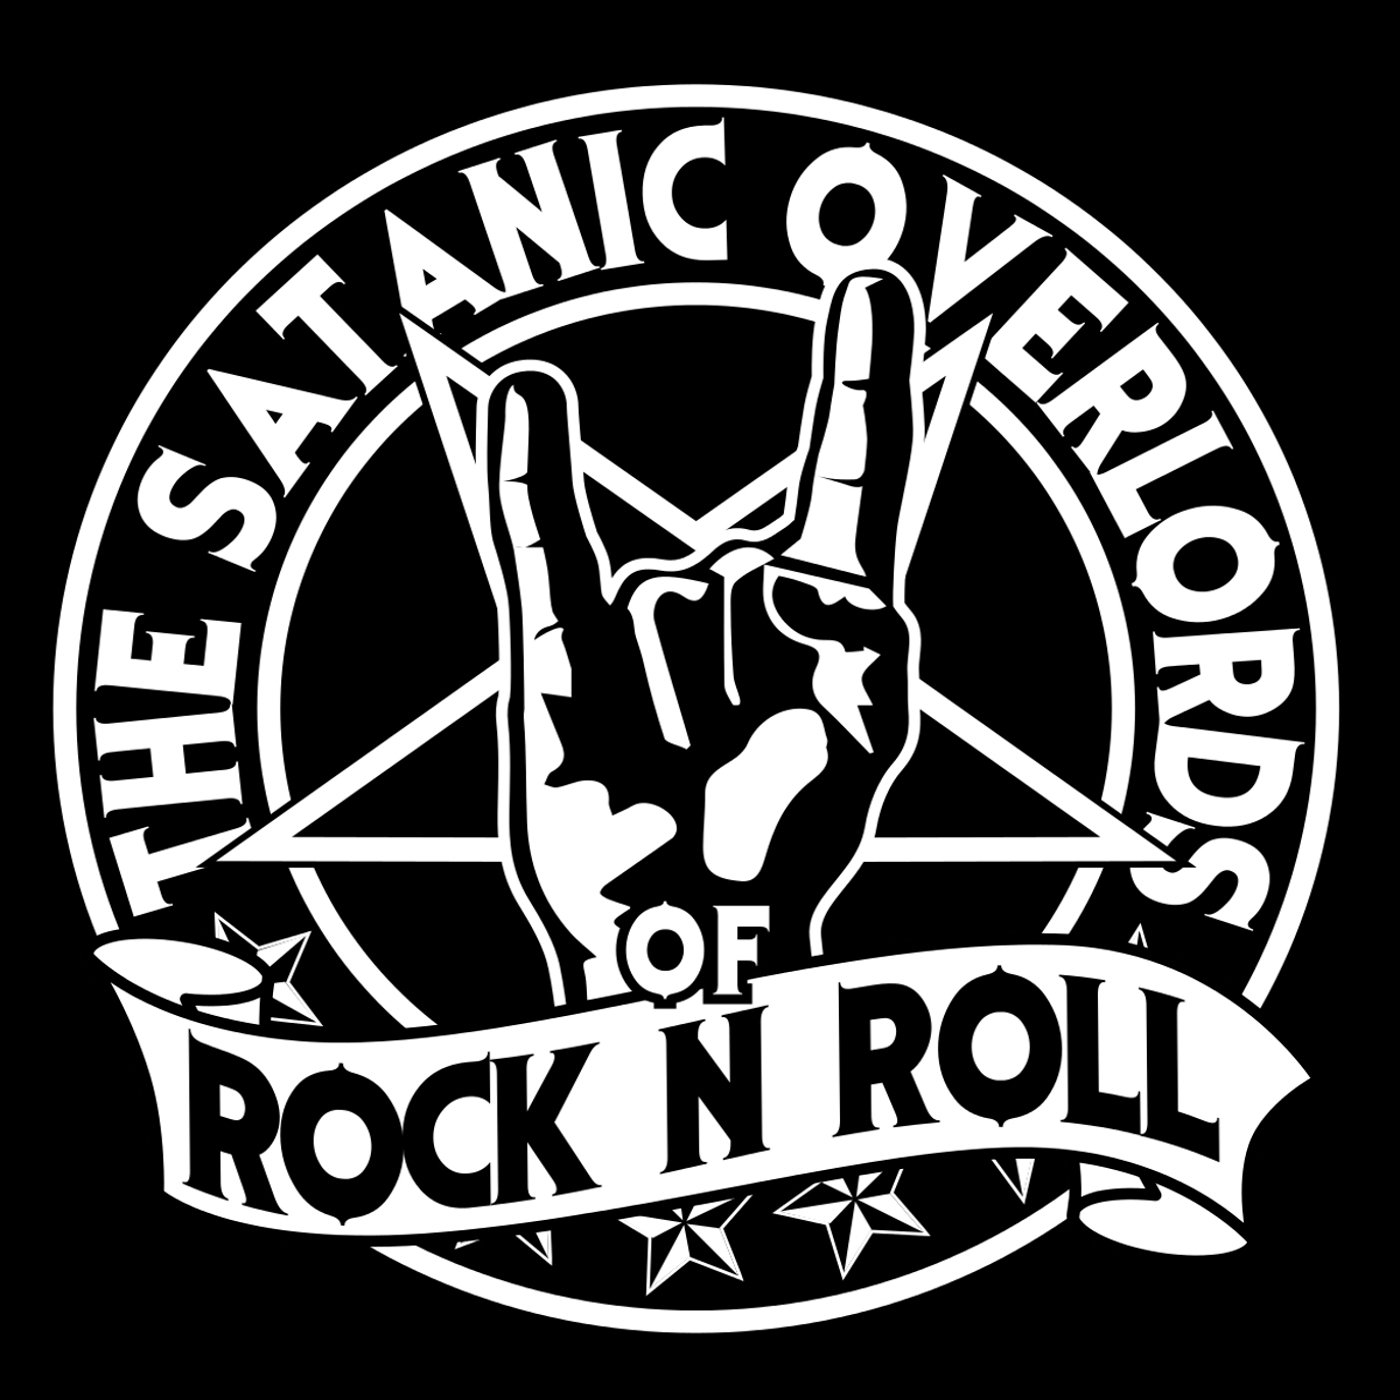 Satanic Overlords Of Rock N Roll